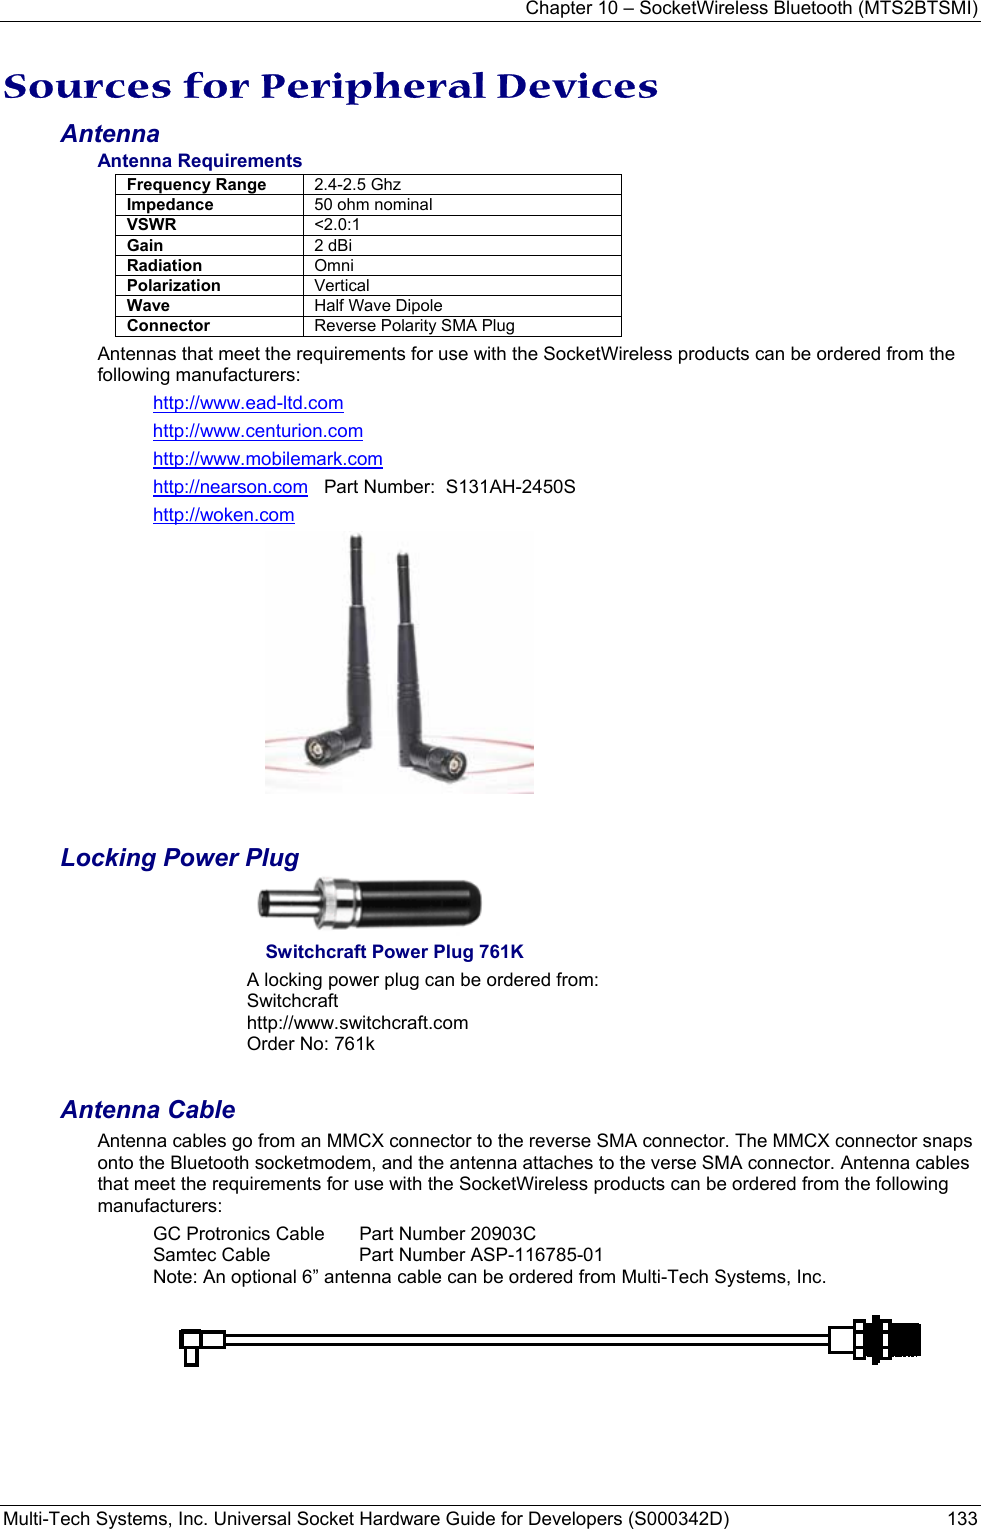 Chapter 10 – SocketWireless Bluetooth (MTS2BTSMI) Multi-Tech Systems, Inc. Universal Socket Hardware Guide for Developers (S000342D)  133  Sources for Peripheral Devices Antenna Antenna Requirements Frequency Range  2.4-2.5 Ghz Impedance  50 ohm nominal VSWR  &lt;2.0:1 Gain  2 dBi Radiation  Omni Polarization  Vertical Wave  Half Wave Dipole Connector  Reverse Polarity SMA Plug  Antennas that meet the requirements for use with the SocketWireless products can be ordered from the following manufacturers: http://www.ead-ltd.com http://www.centurion.com http://www.mobilemark.com http://nearson.com   Part Number:  S131AH-2450S  http://woken.com  Locking Power Plug   Switchcraft Power Plug 761K A locking power plug can be ordered from: Switchcraft  http://www.switchcraft.com Order No: 761k  Antenna Cable Antenna cables go from an MMCX connector to the reverse SMA connector. The MMCX connector snaps onto the Bluetooth socketmodem, and the antenna attaches to the verse SMA connector. Antenna cables that meet the requirements for use with the SocketWireless products can be ordered from the following manufacturers: GC Protronics Cable   Part Number 20903C Samtec Cable  Part Number ASP-116785-01 Note: An optional 6” antenna cable can be ordered from Multi-Tech Systems, Inc. 